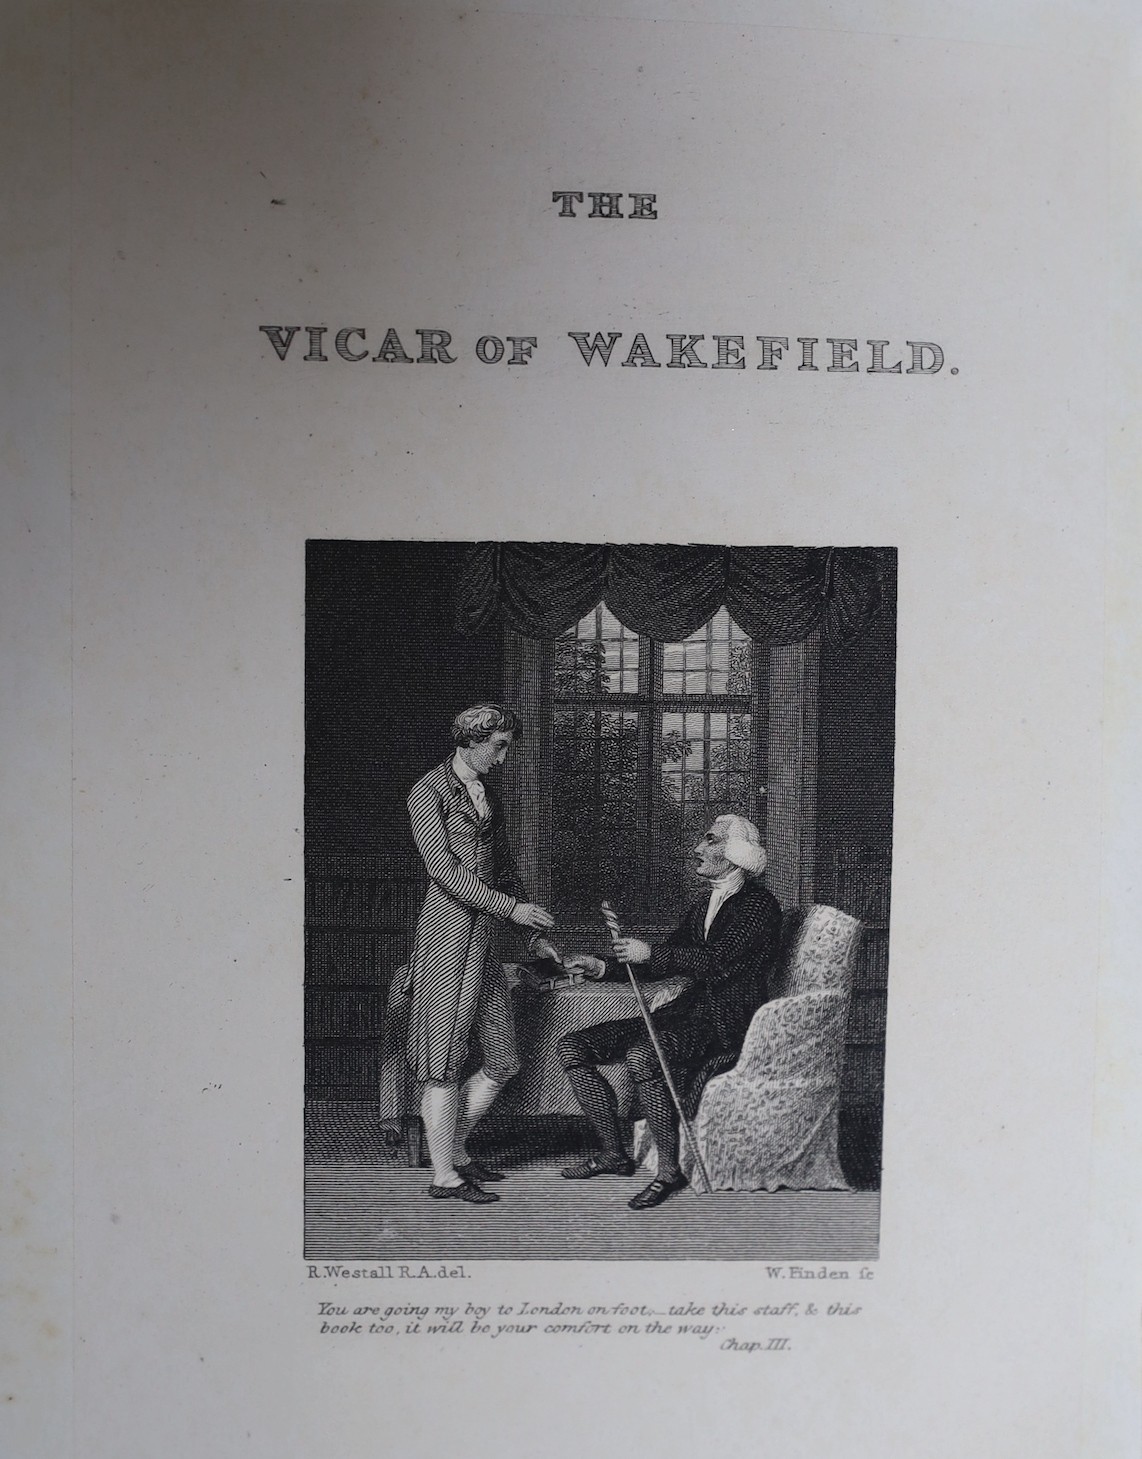 ° ° Richard Westall R.A. (illustrator) - Three works - Goldsmith, Oliver - The Vicar of Wakefield - Image 3 of 3